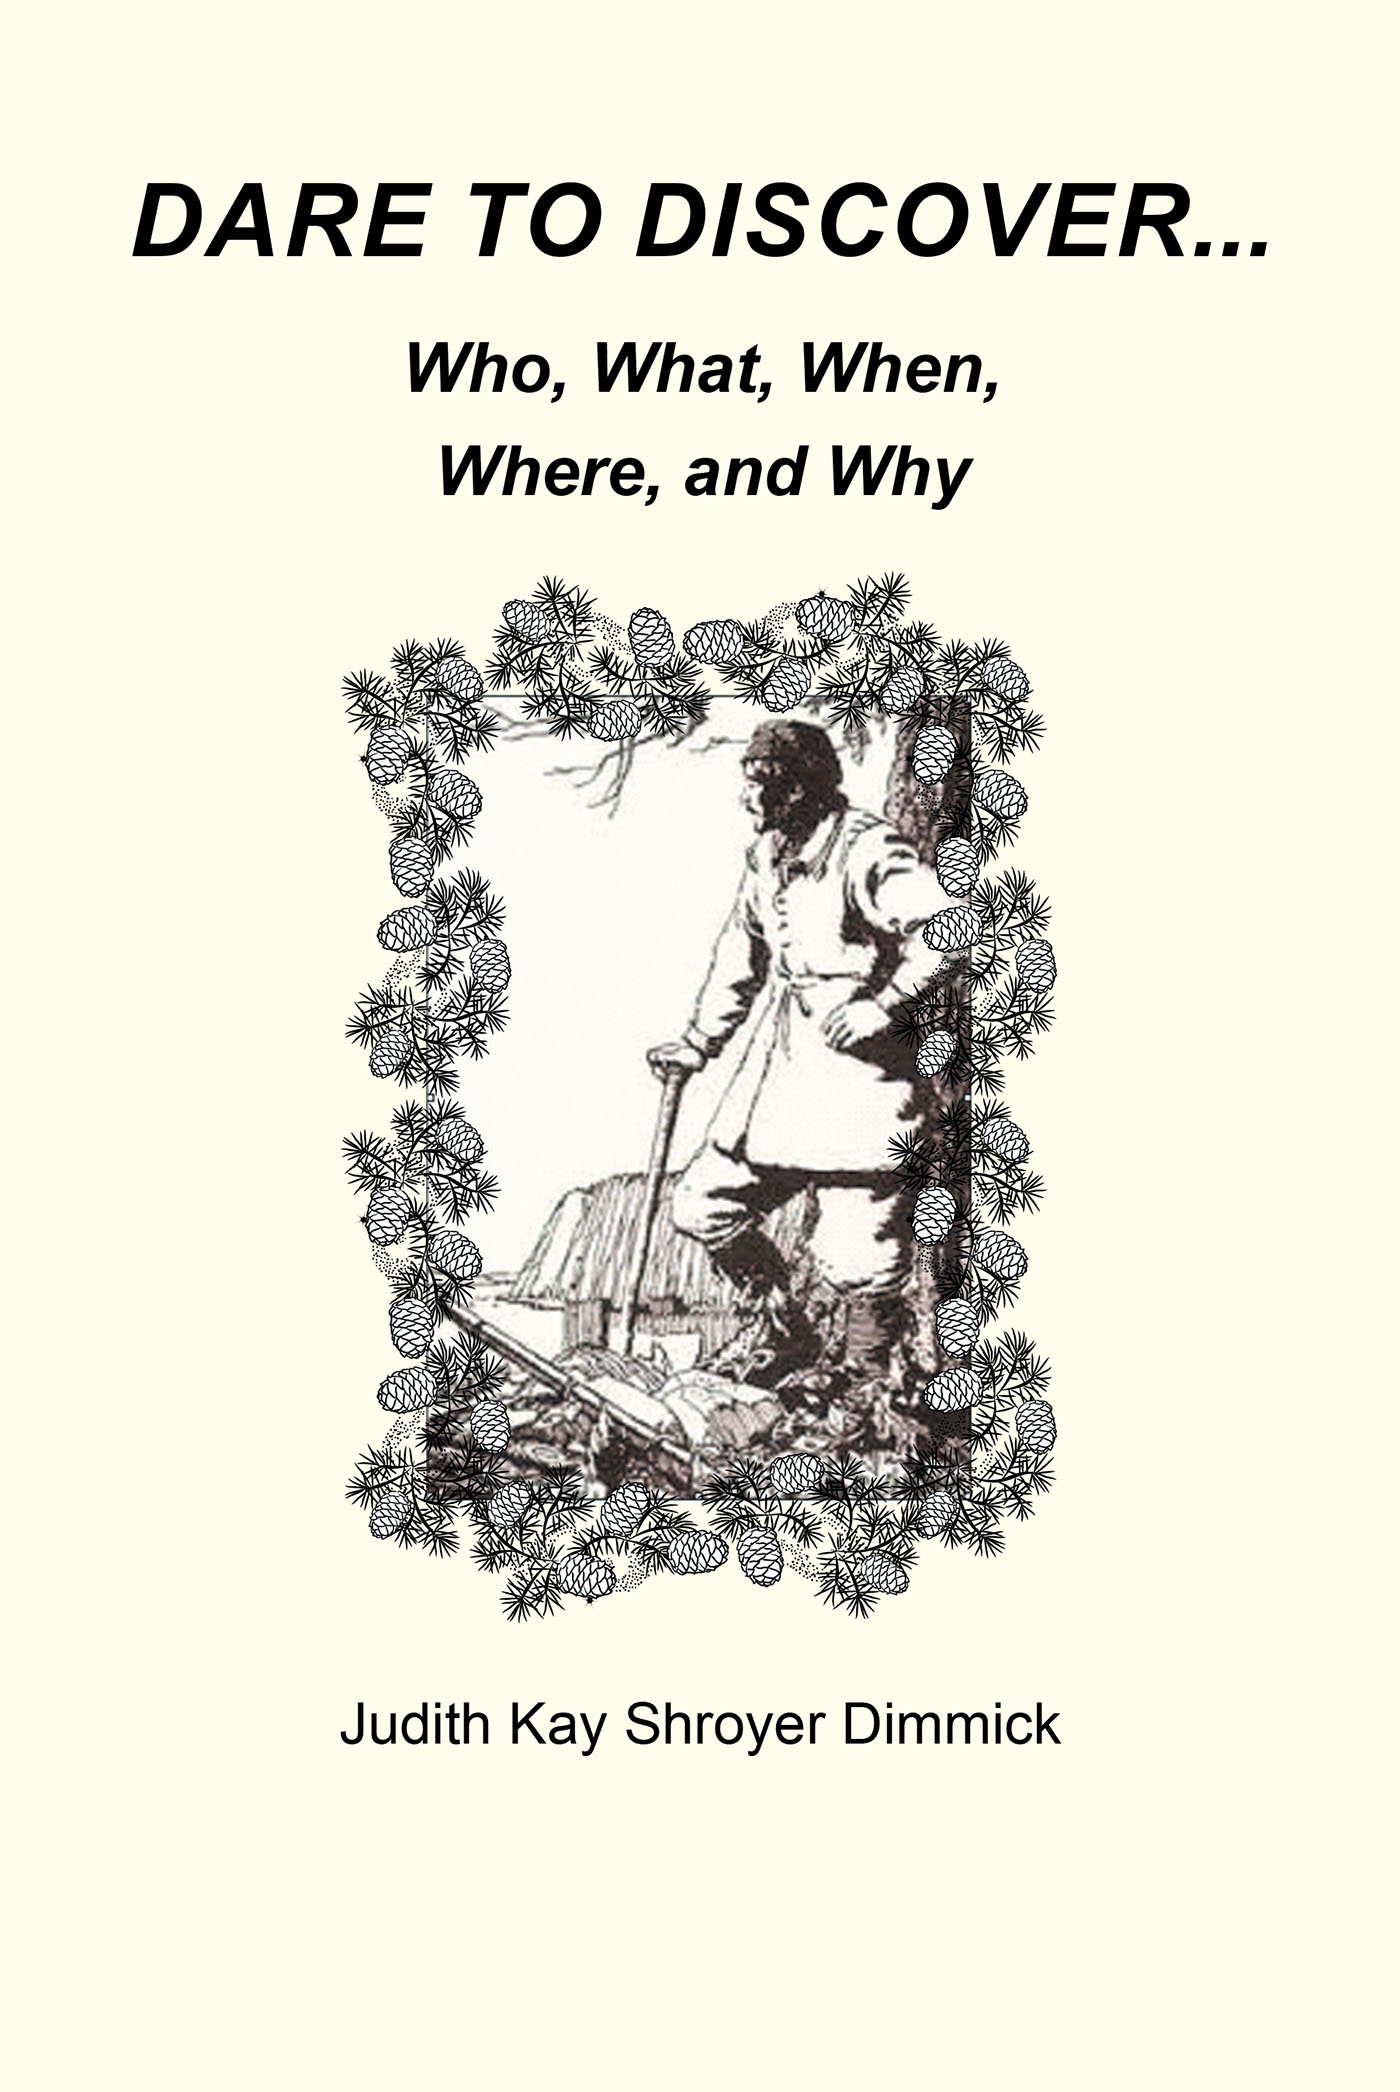 Judith Kay Shroyer Dimmick’s New Book, "Dare to Discover…: Who, What, Where, When, and Why," is a Fascinating and Informative Guide on How to Unlock One’s Ancestry